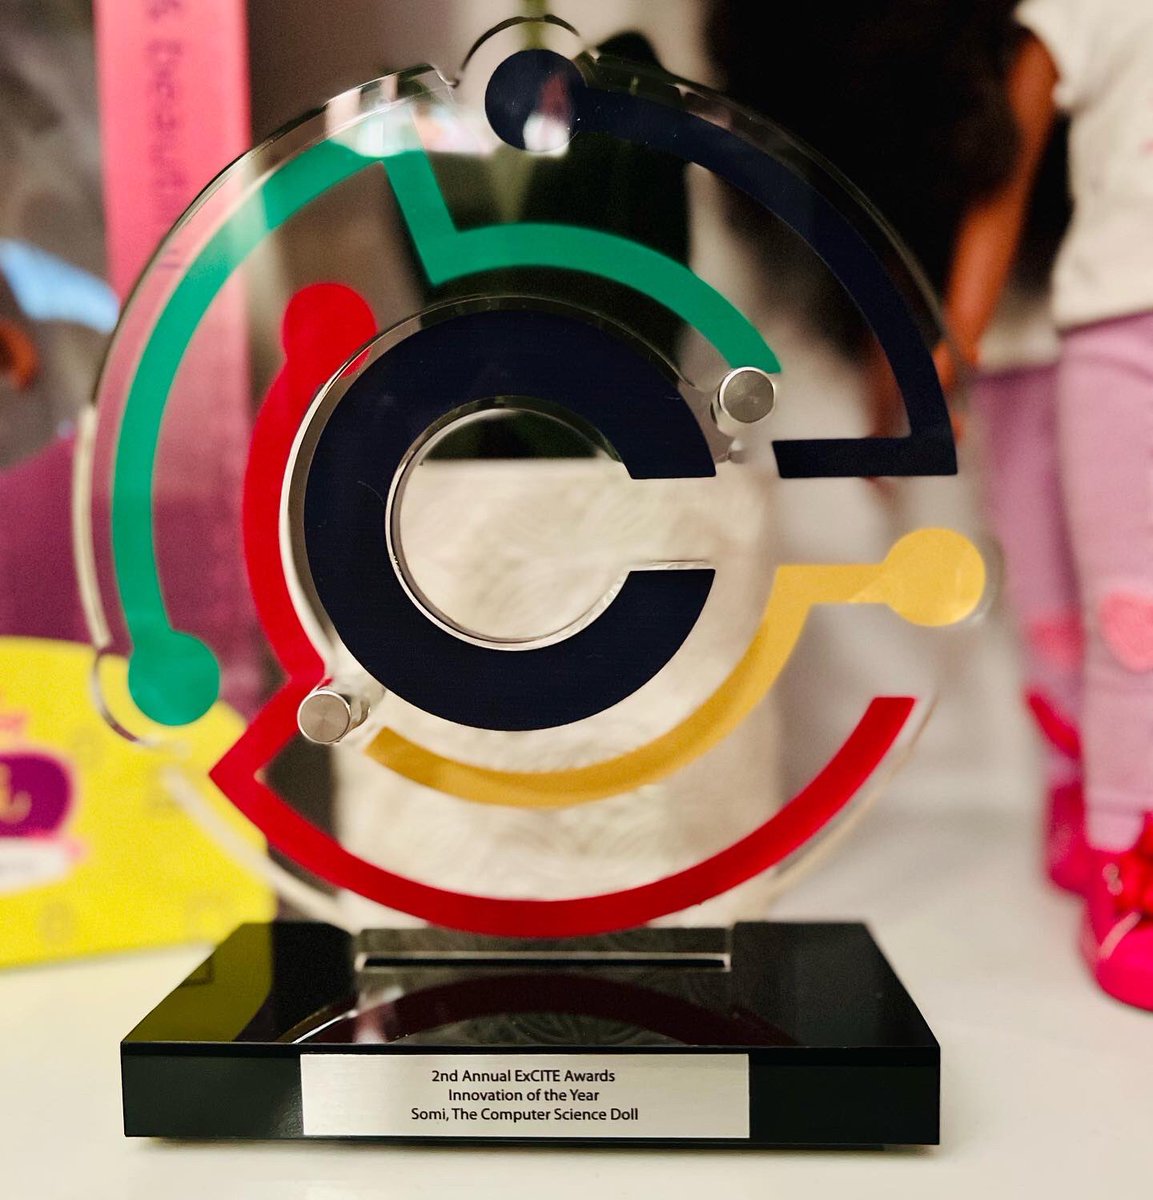 Receiving this beautiful @_CodeCrew ExCITE Innovation of the Year 2022 award for our Somi, the Computer Science Doll 😊 is encouraging for us to continue to create fun CS educational products that transform lives. Share and get a Somi doll at somidoll.com #SomiDoll